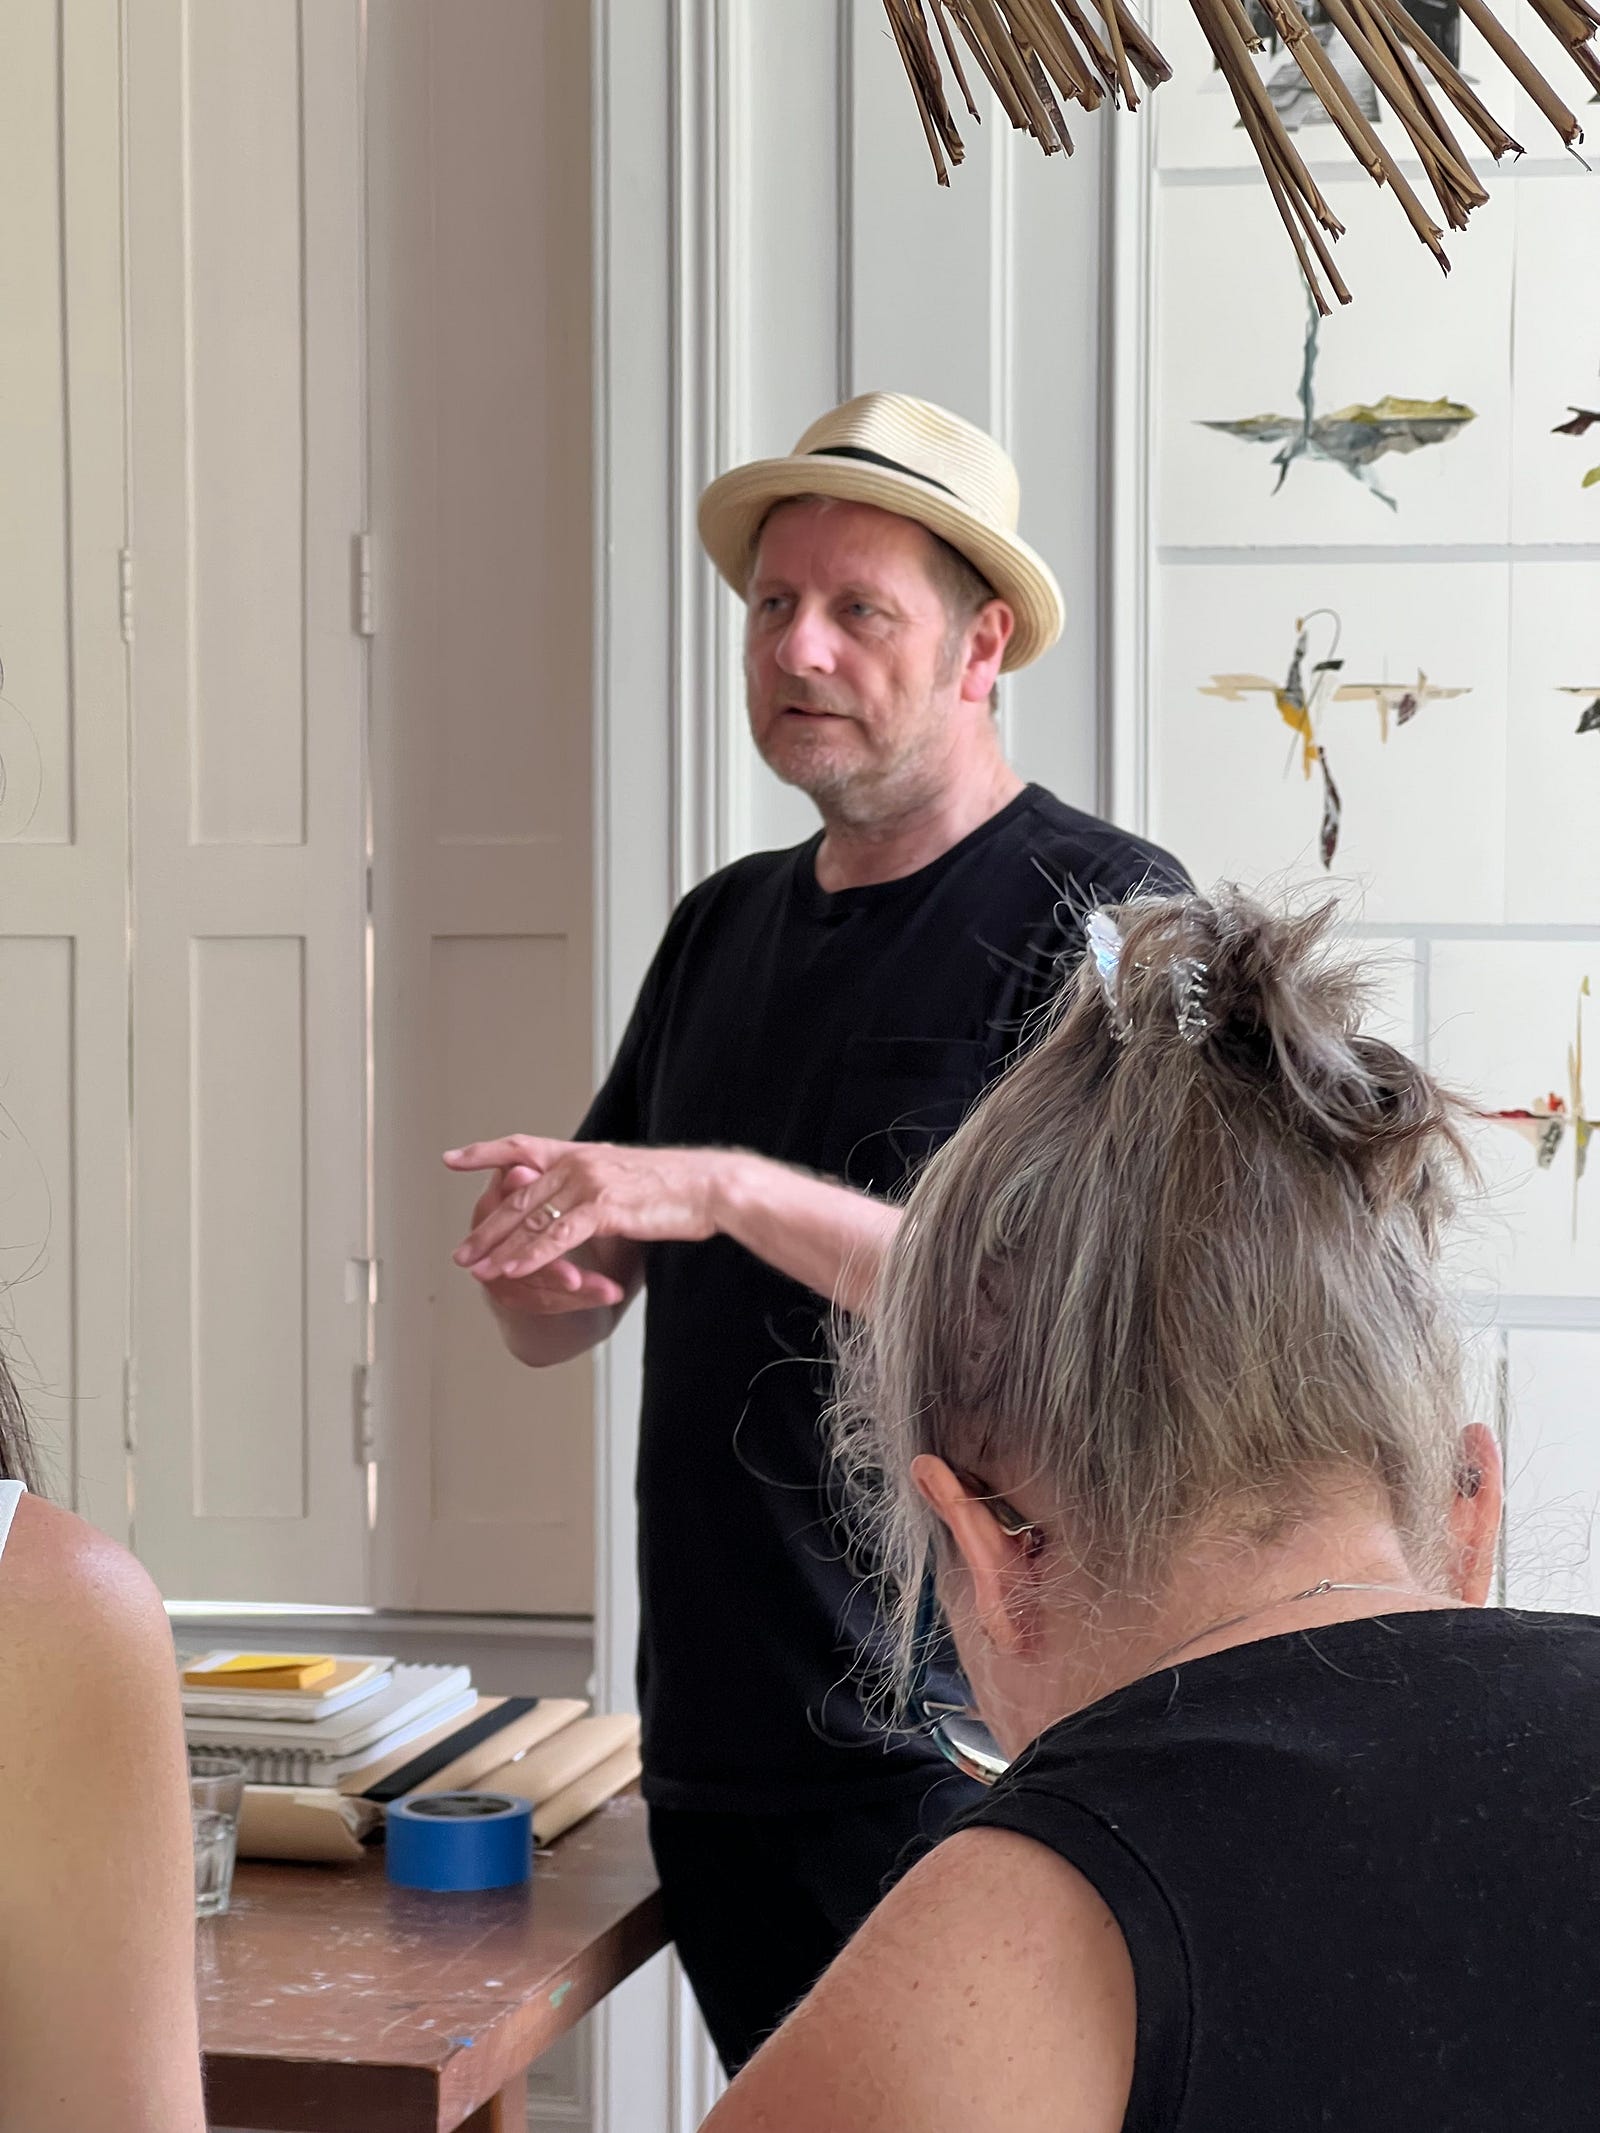 Photo of Artist-in-Residence Clive Knights telling the story of his art during an open studio session at Chateau Orquevaux, France